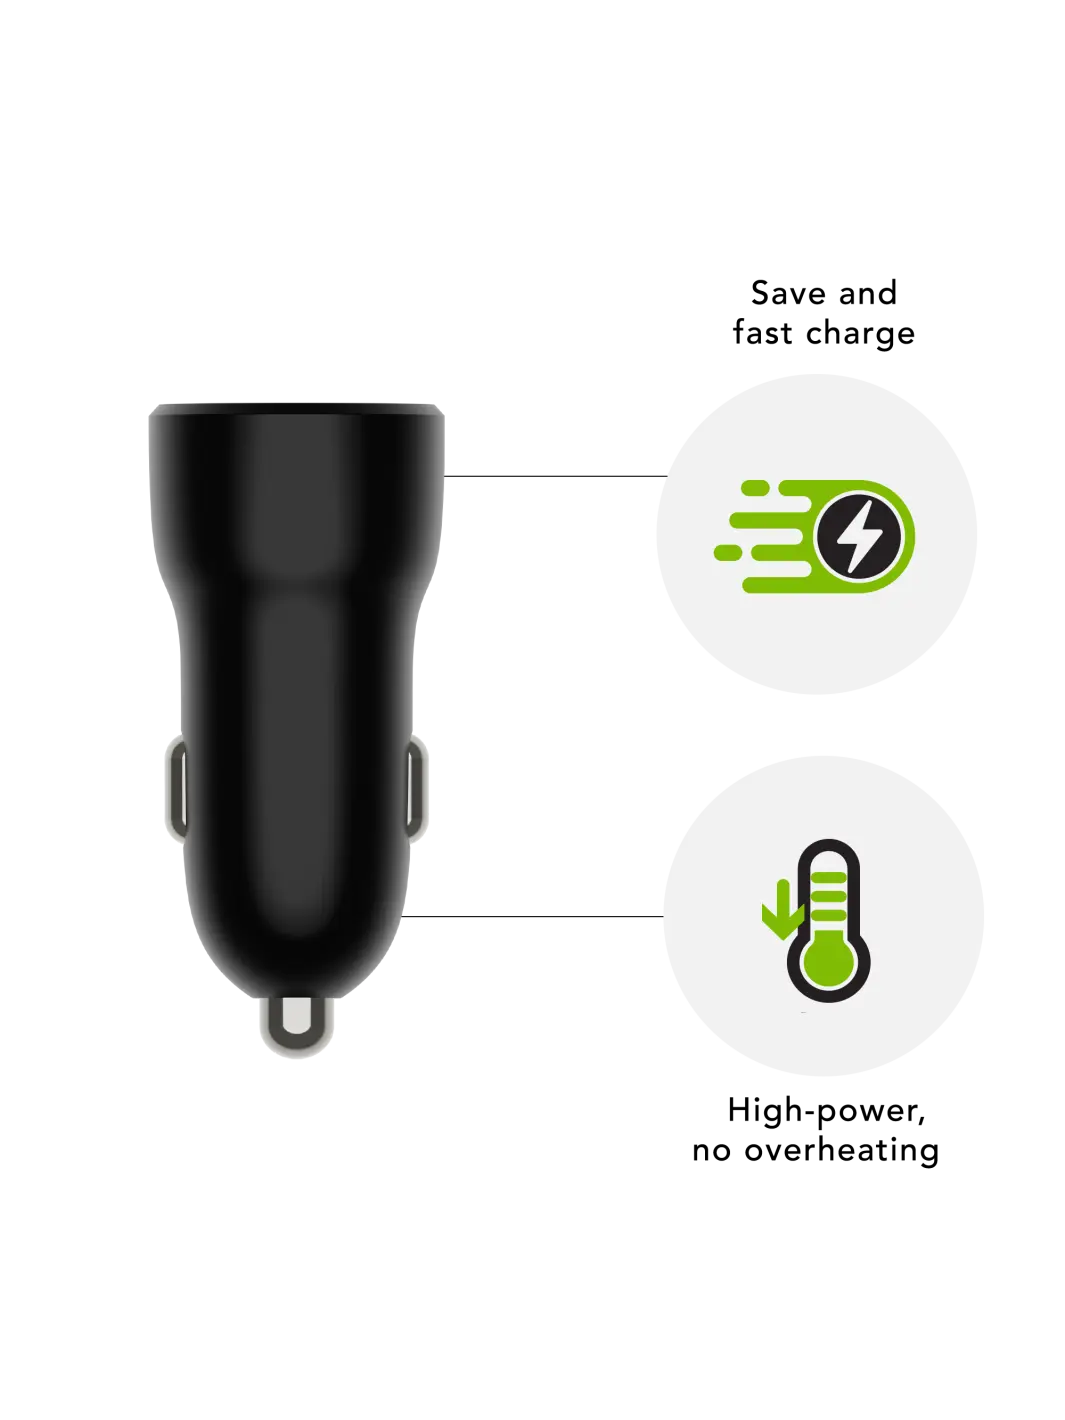 CAR CHARGERS Black 30W